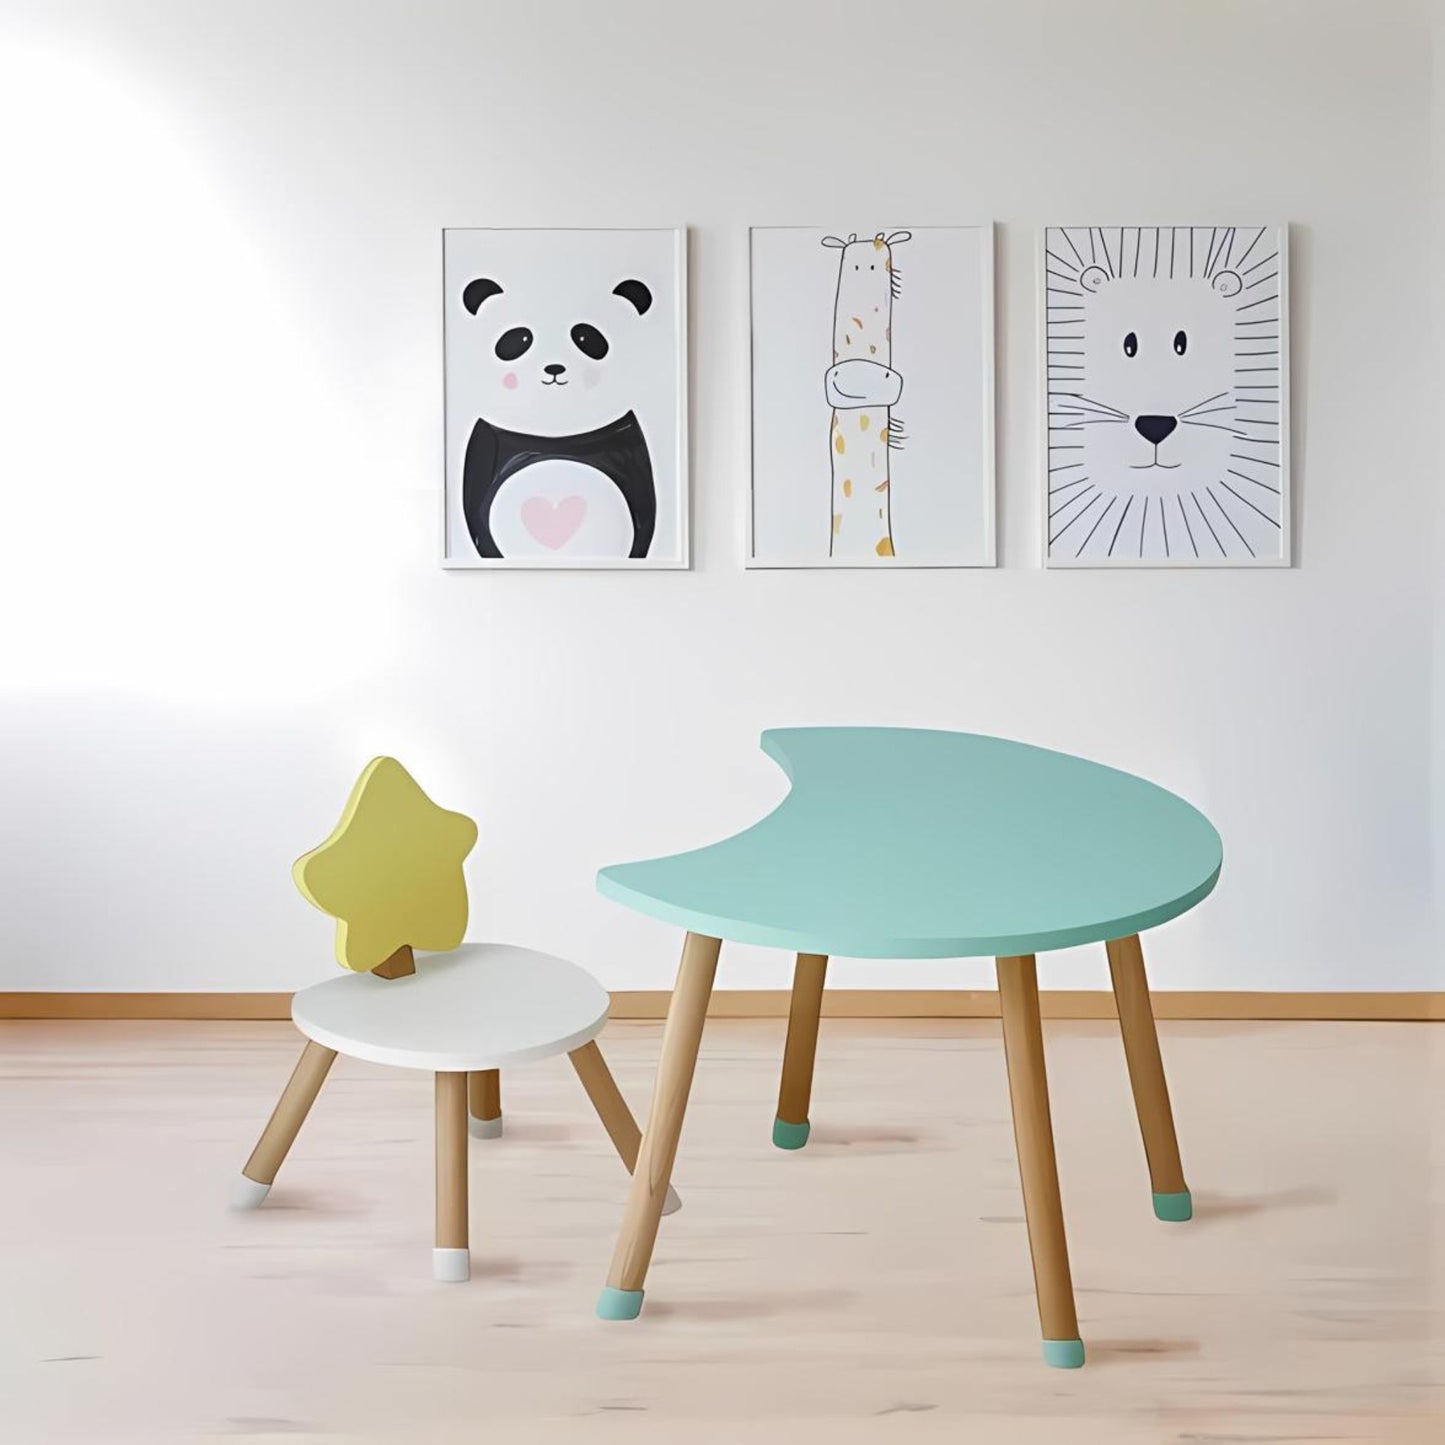 Hamlet Lunella Kids Table and Chair Set in Mint